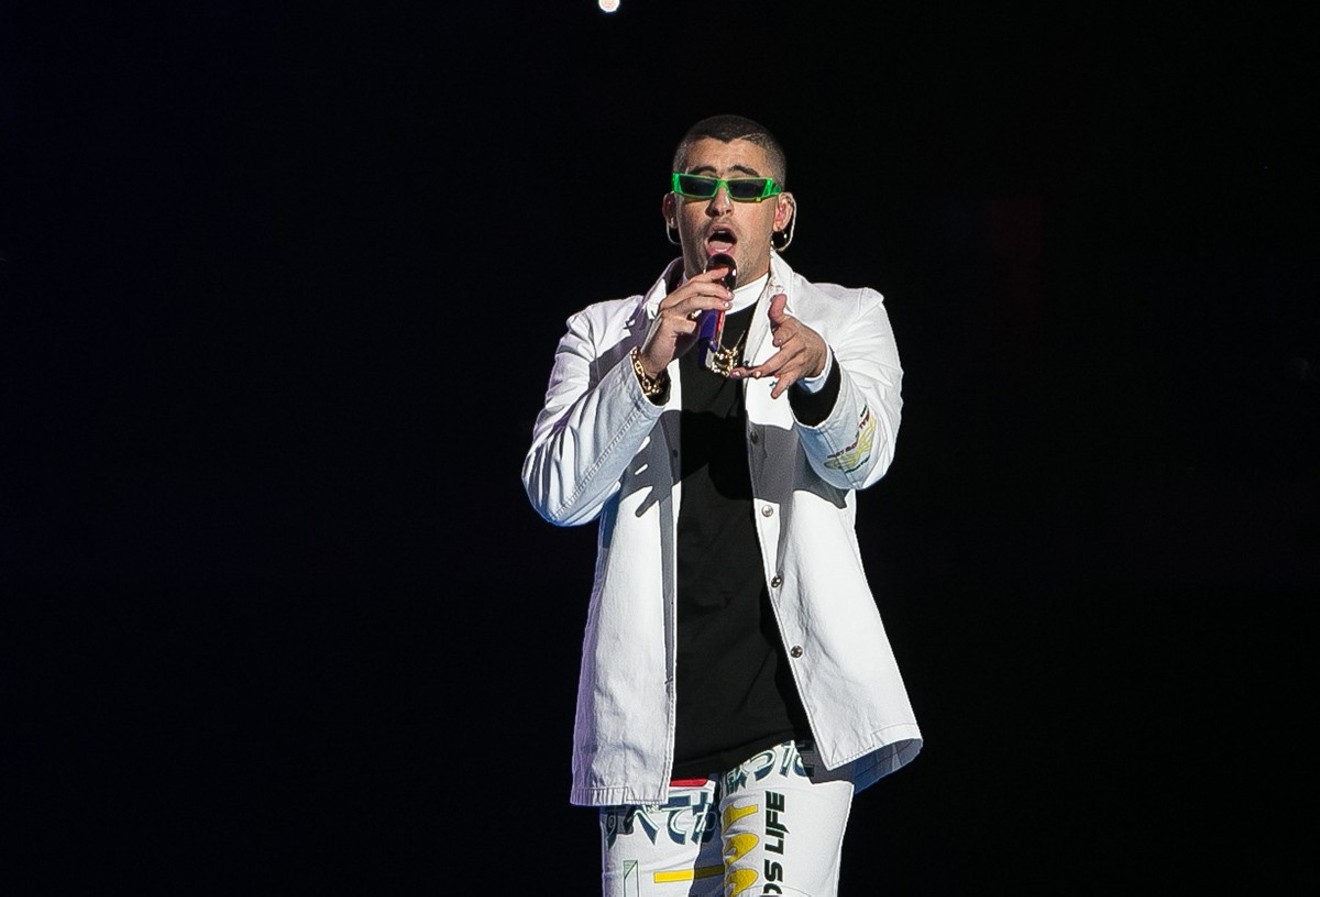 Bad Bunny. See more photos from the show.